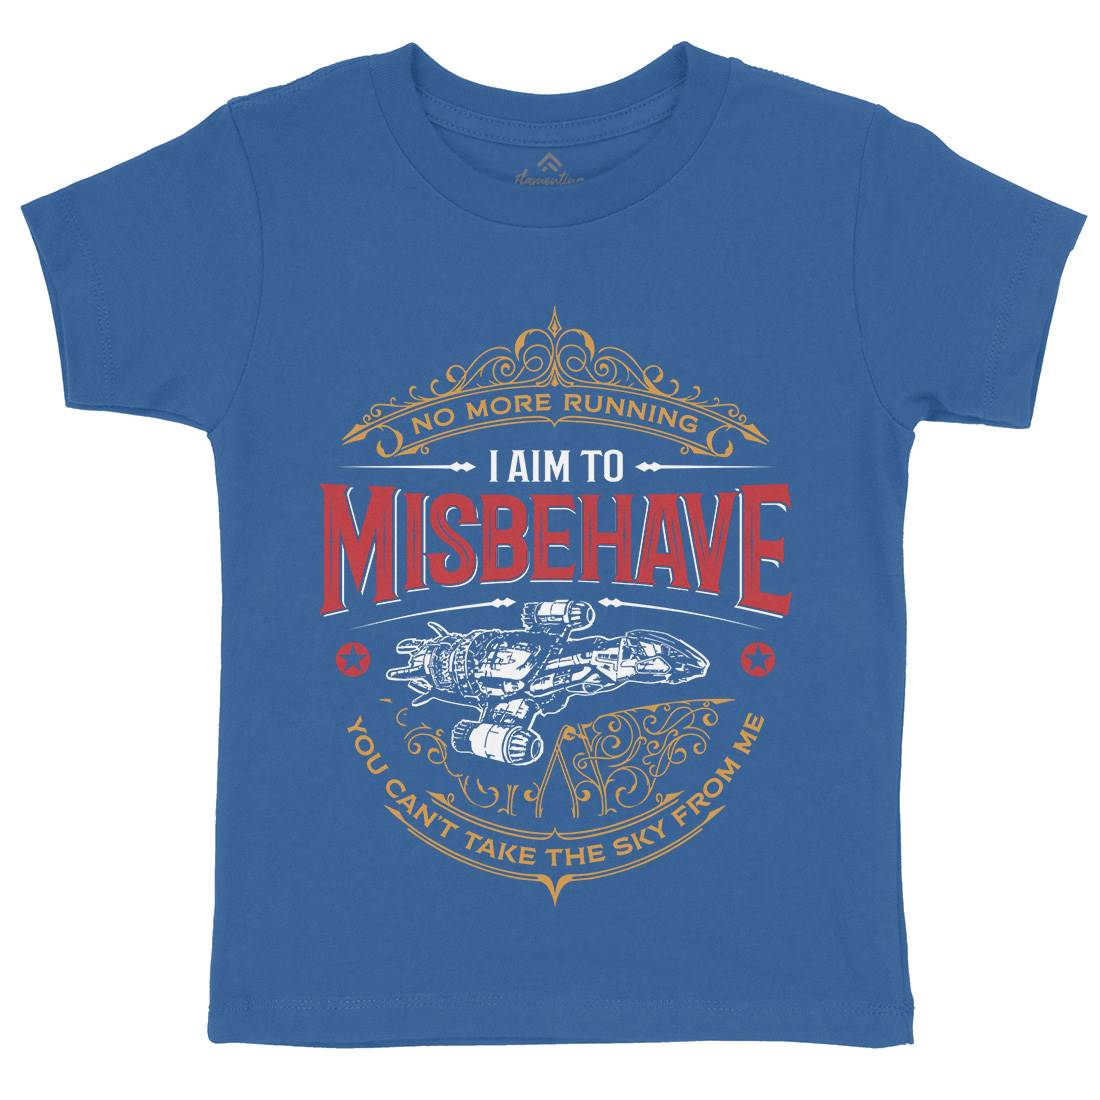 I Aim To Misbehave Kids Organic Crew Neck T-Shirt Space D435